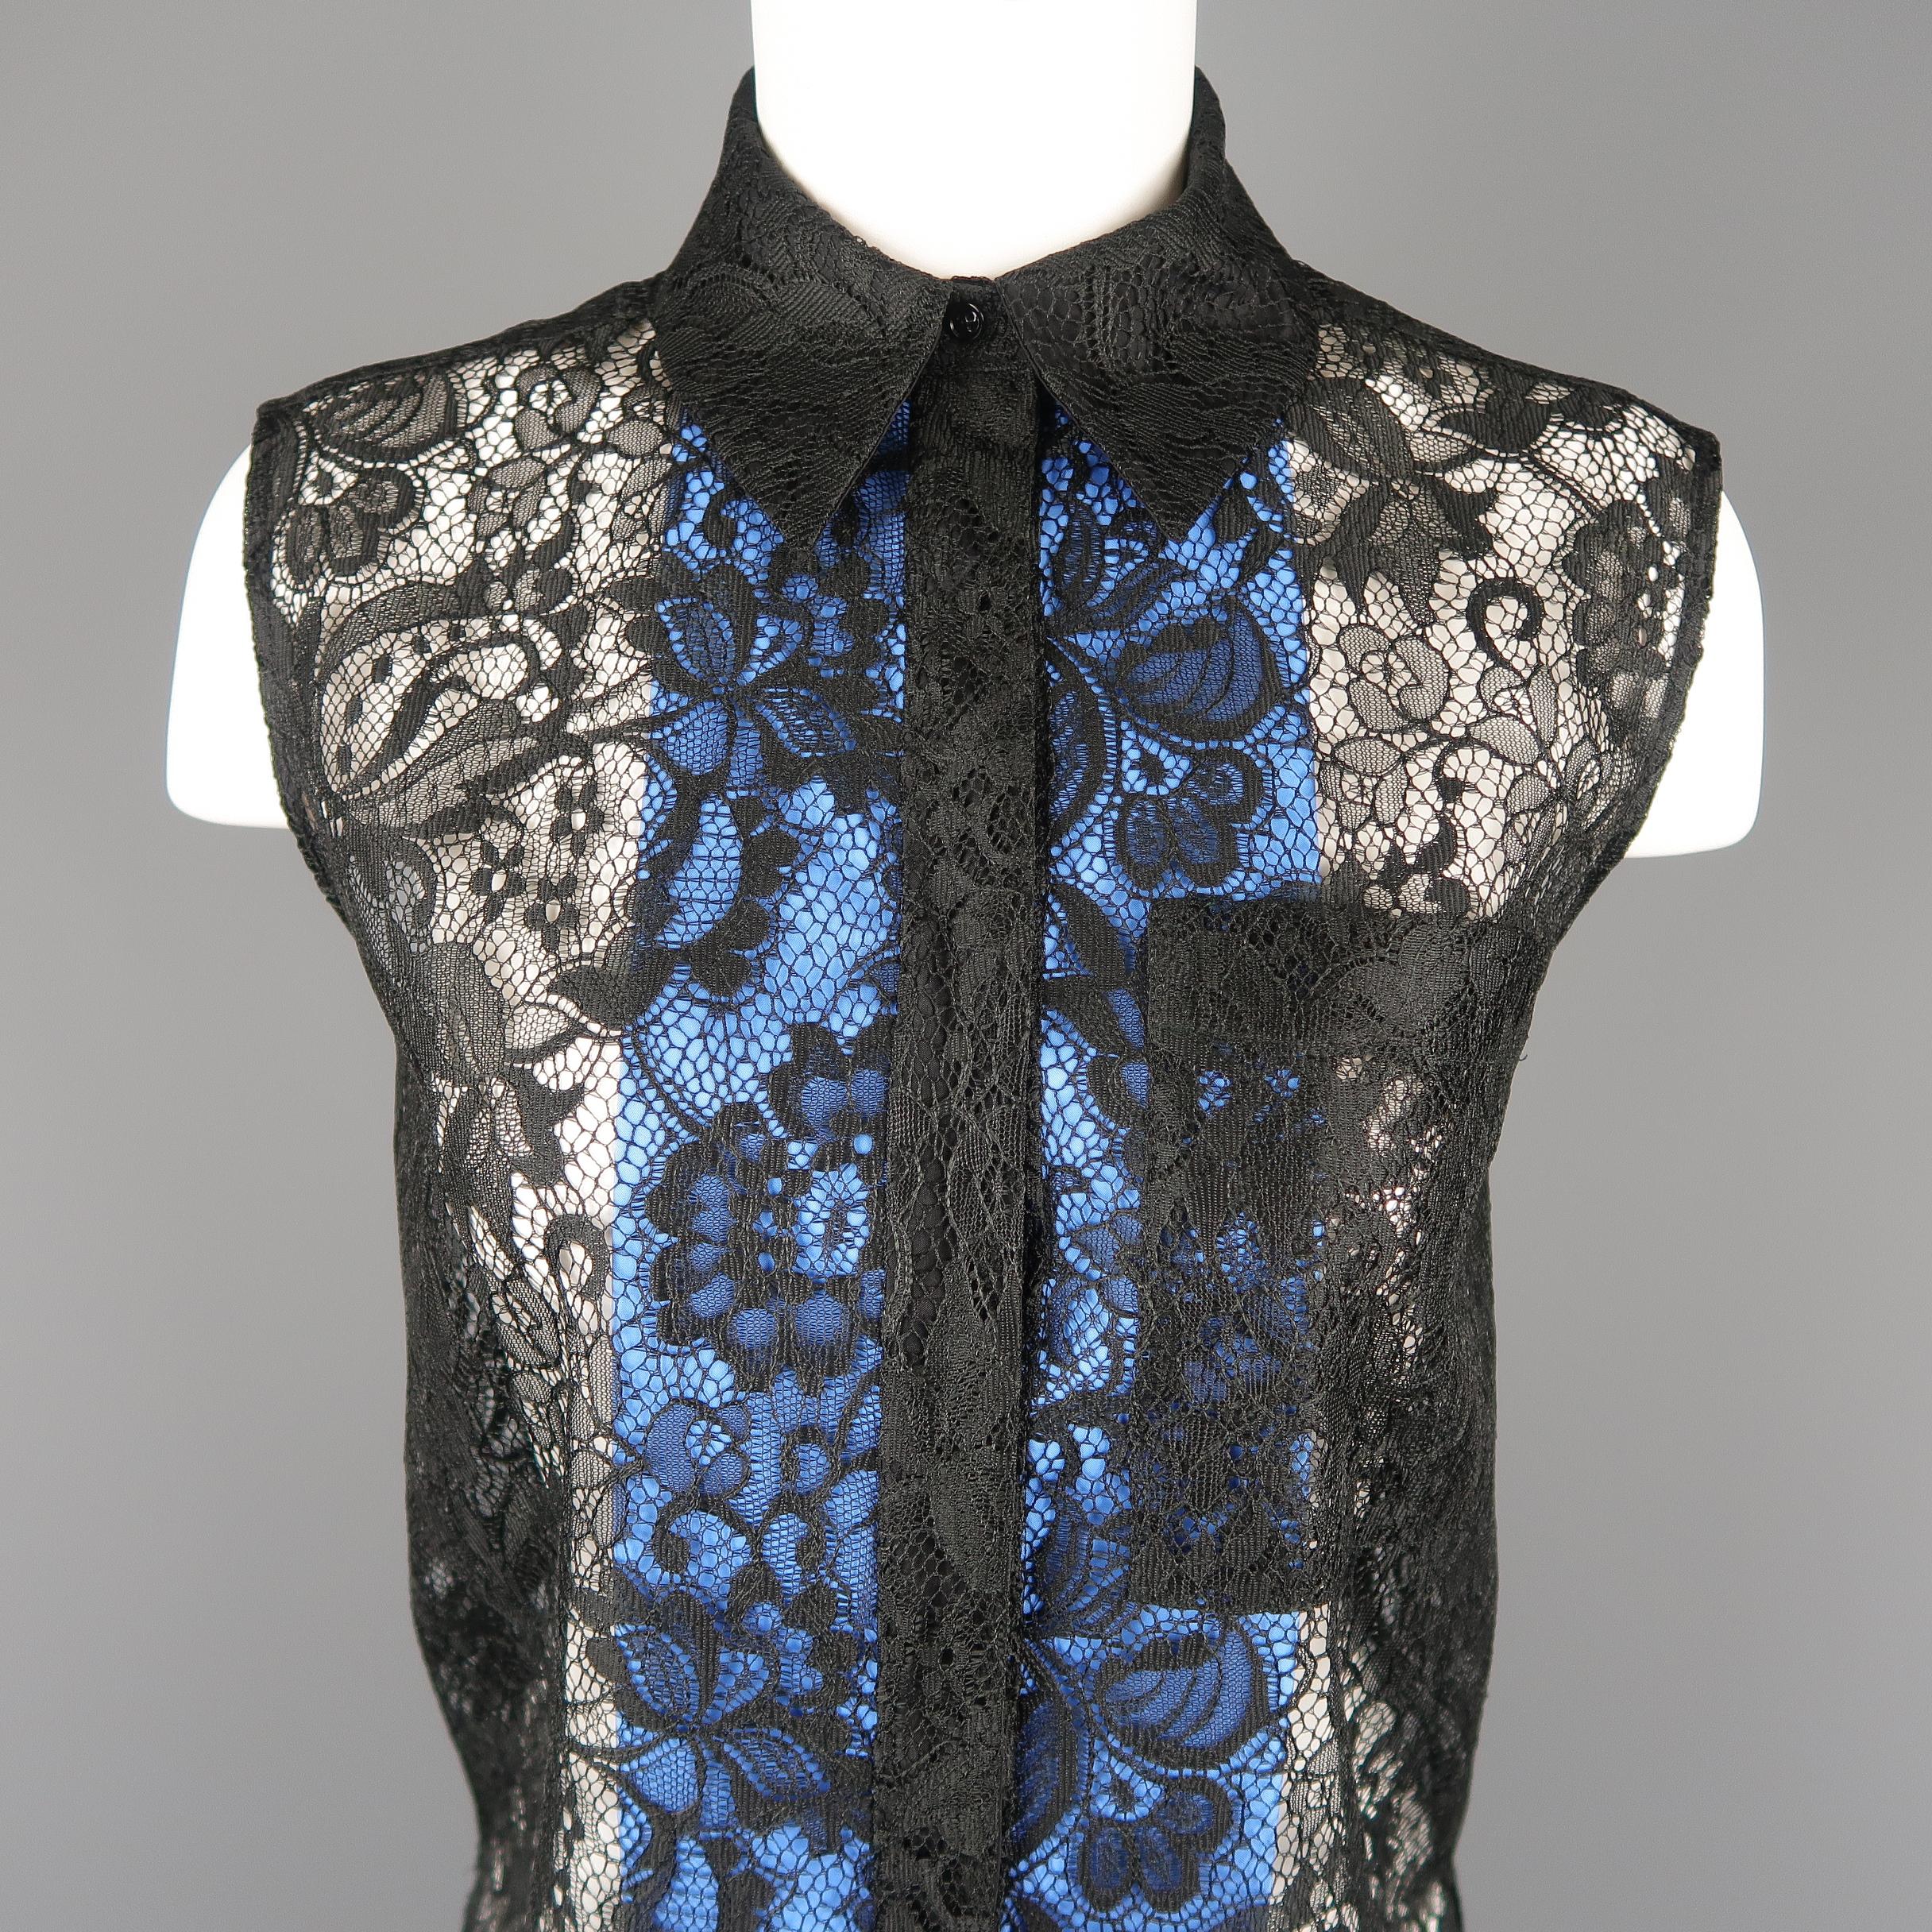 BALENCIAGA spring 2011 sleeveless blouse comes in black lace with a pointed collar, hidden placket button up front, patch breast pocket, and curved front hem with light blue twill lining panels. Made in Italy.
 
Excellent Pre-Owned